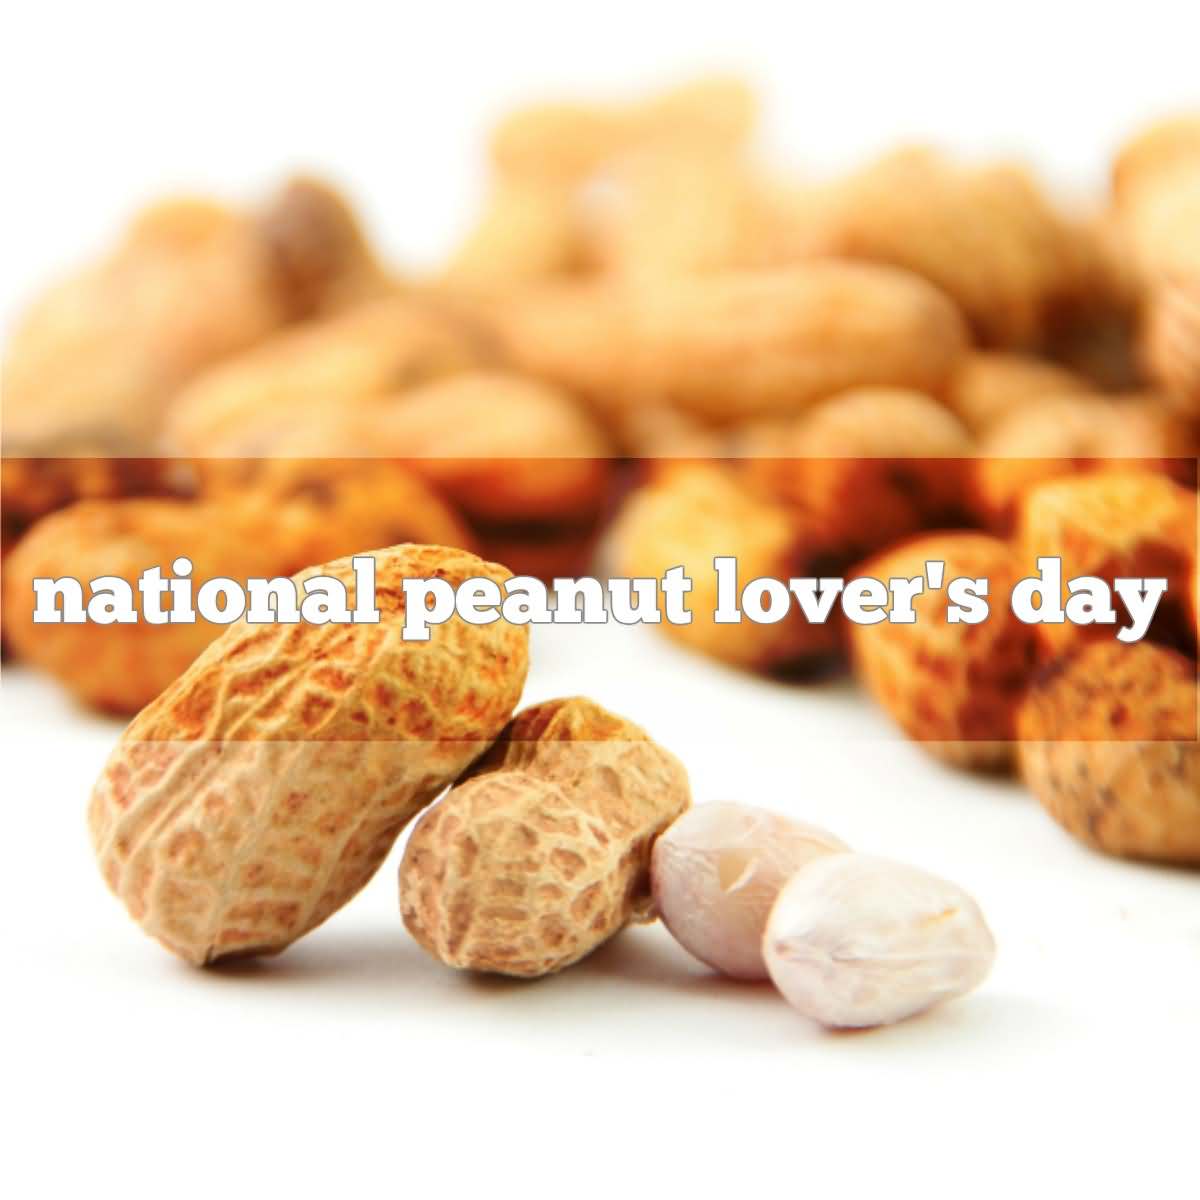 National Peanut Lover's Day